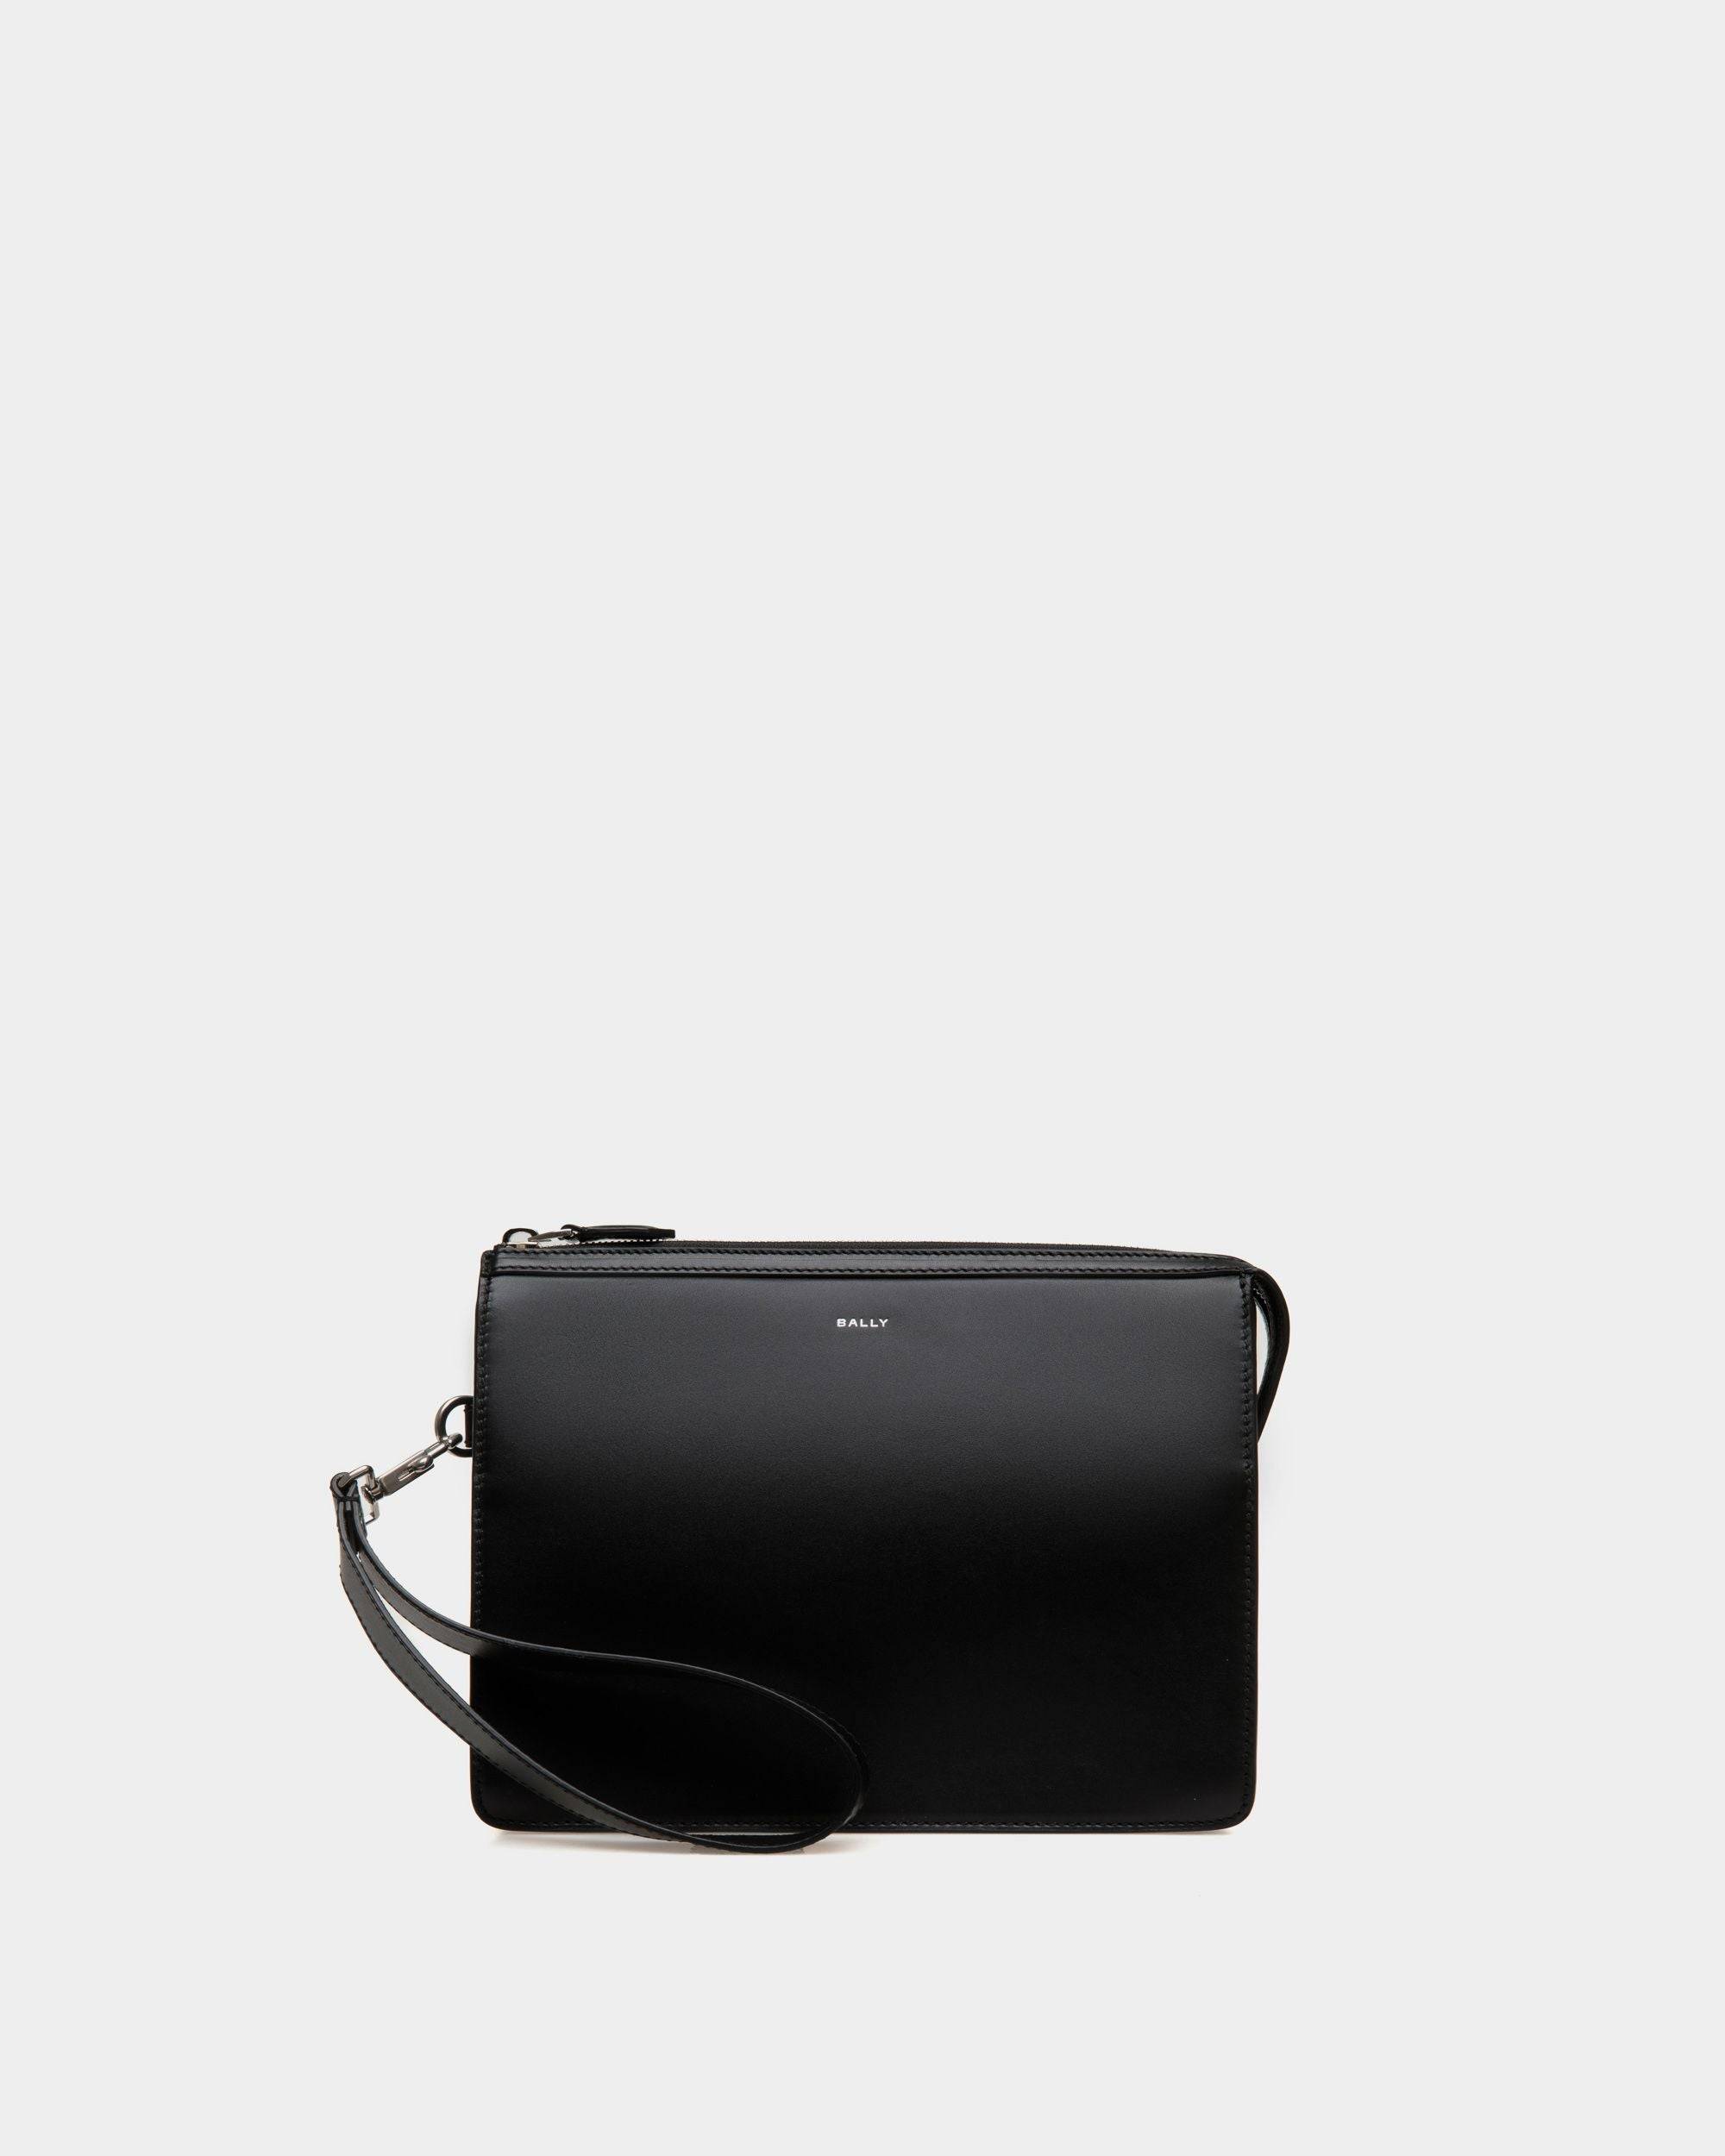 Men's Busy Bally Pouch in Black Leather | Bally | Still Life Front